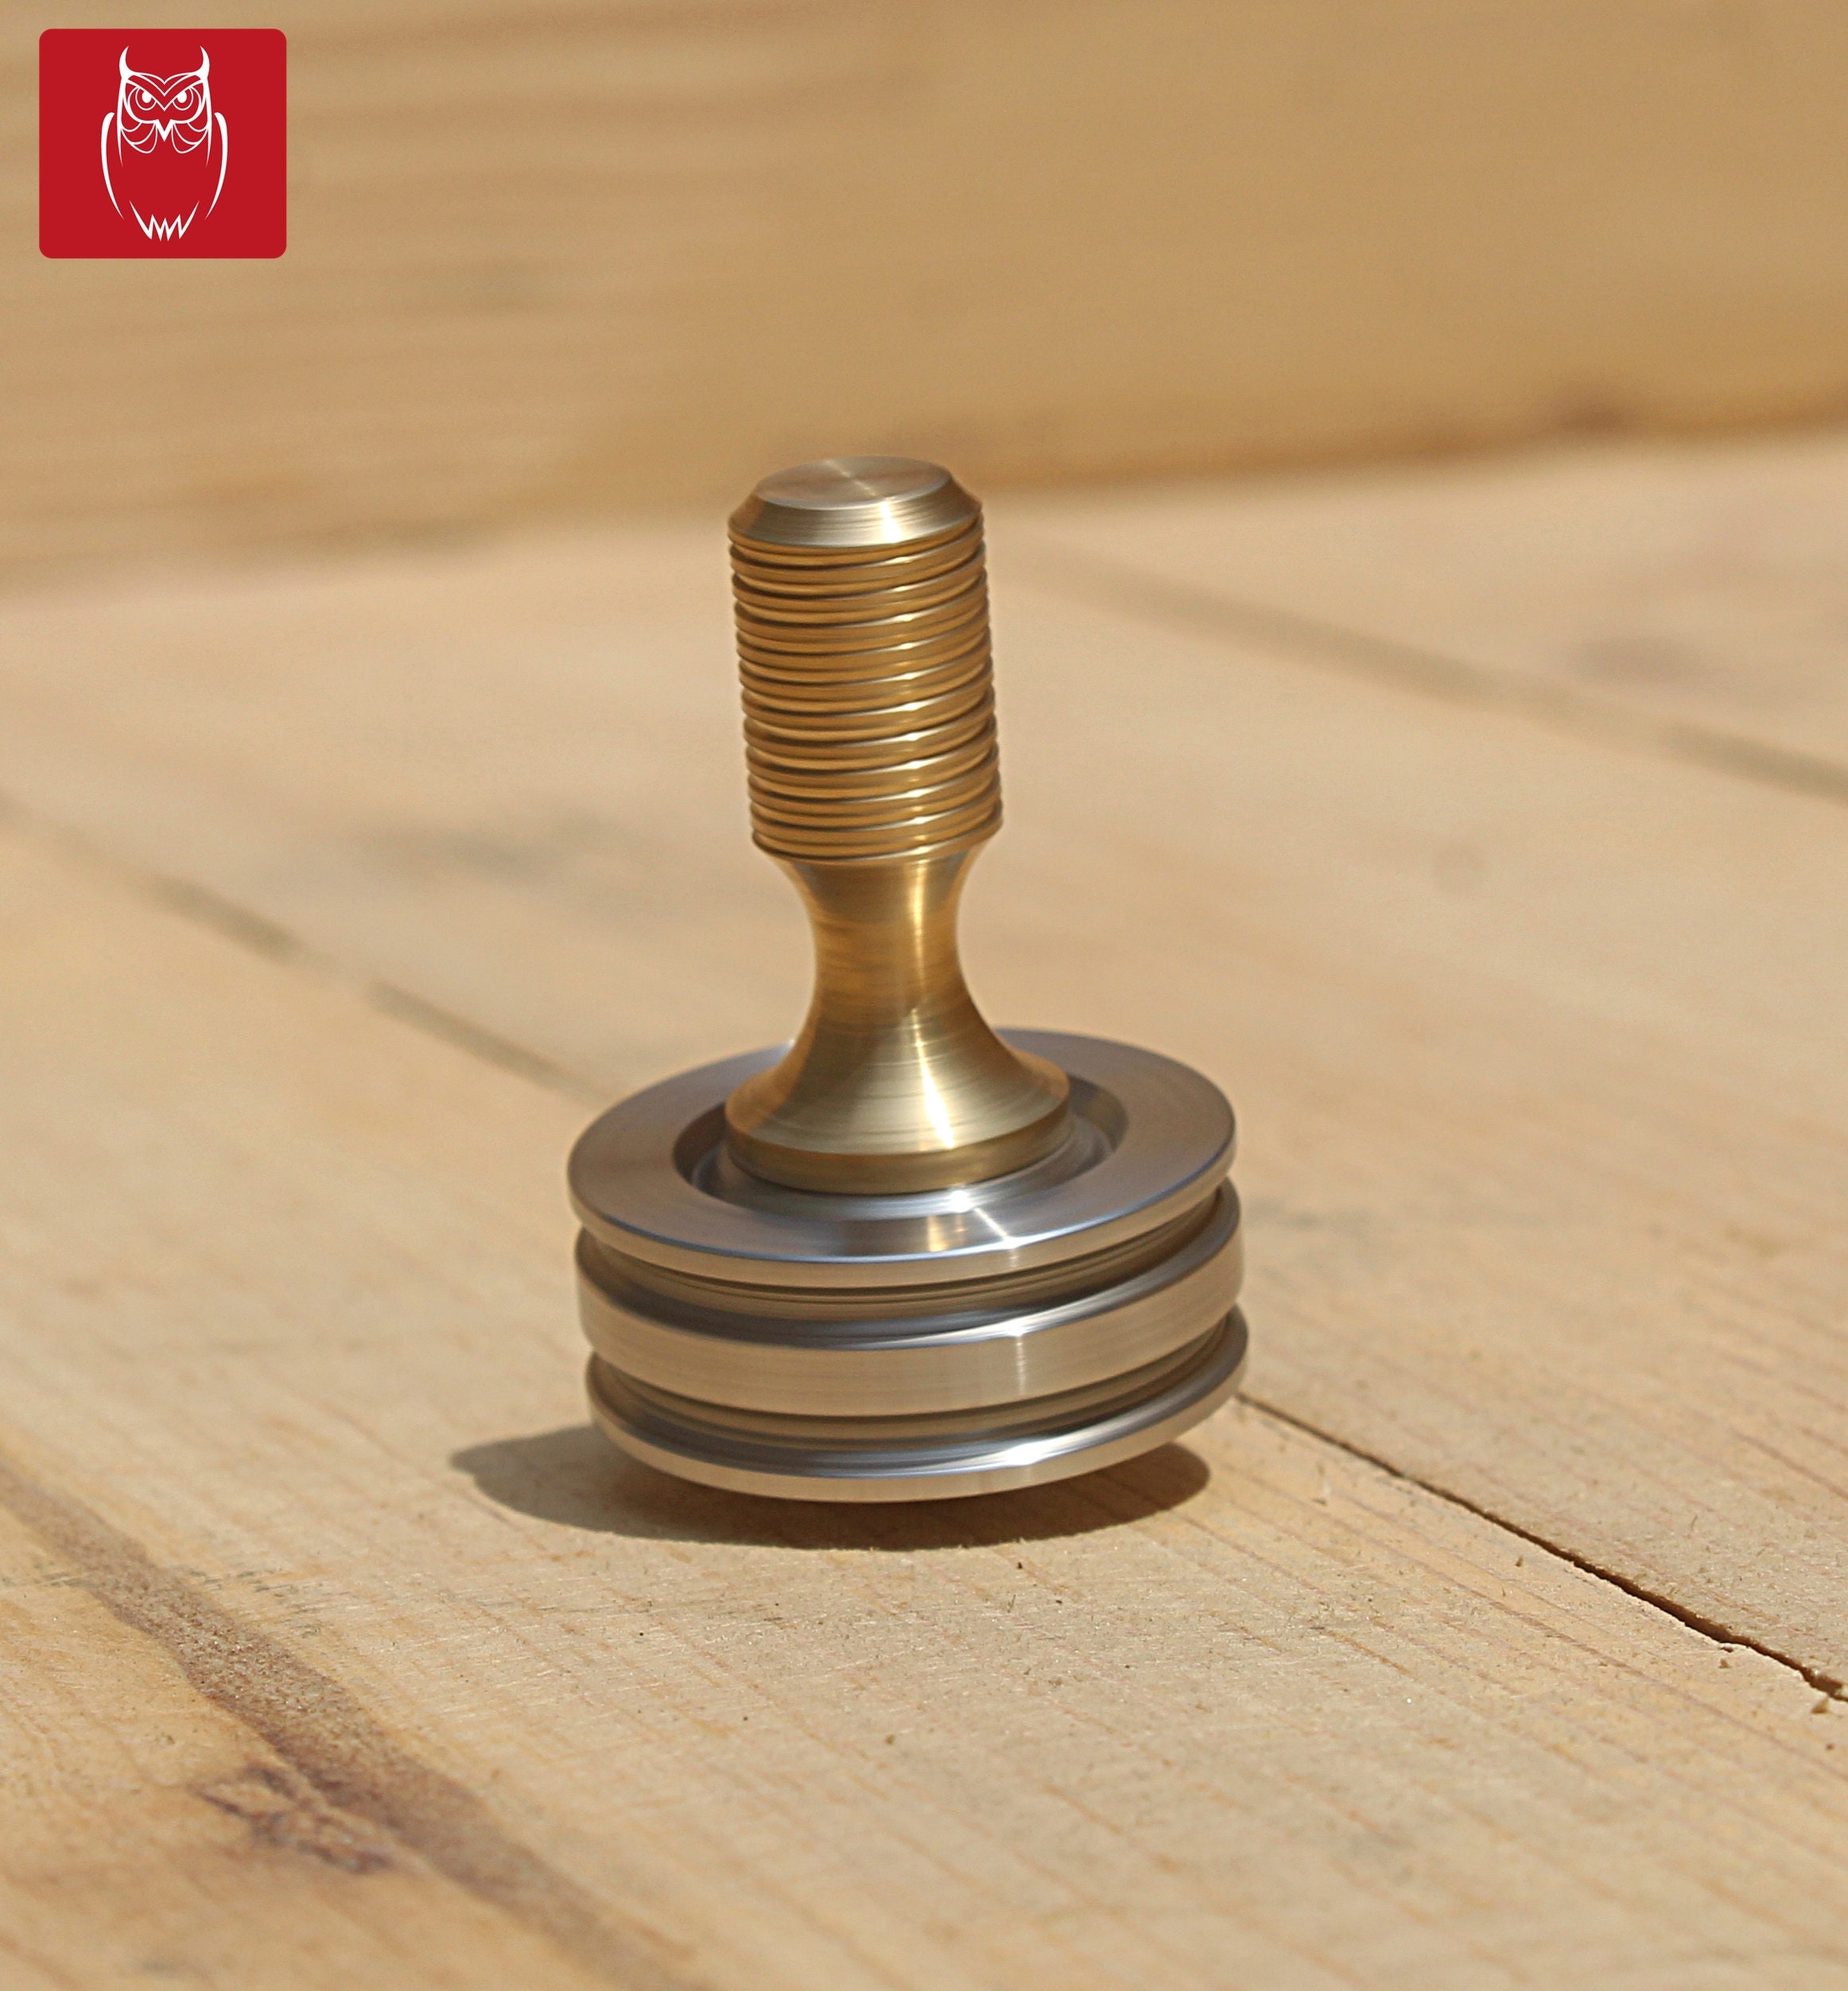 Whirl Brass Spinning Tops Set of 2 + Reviews